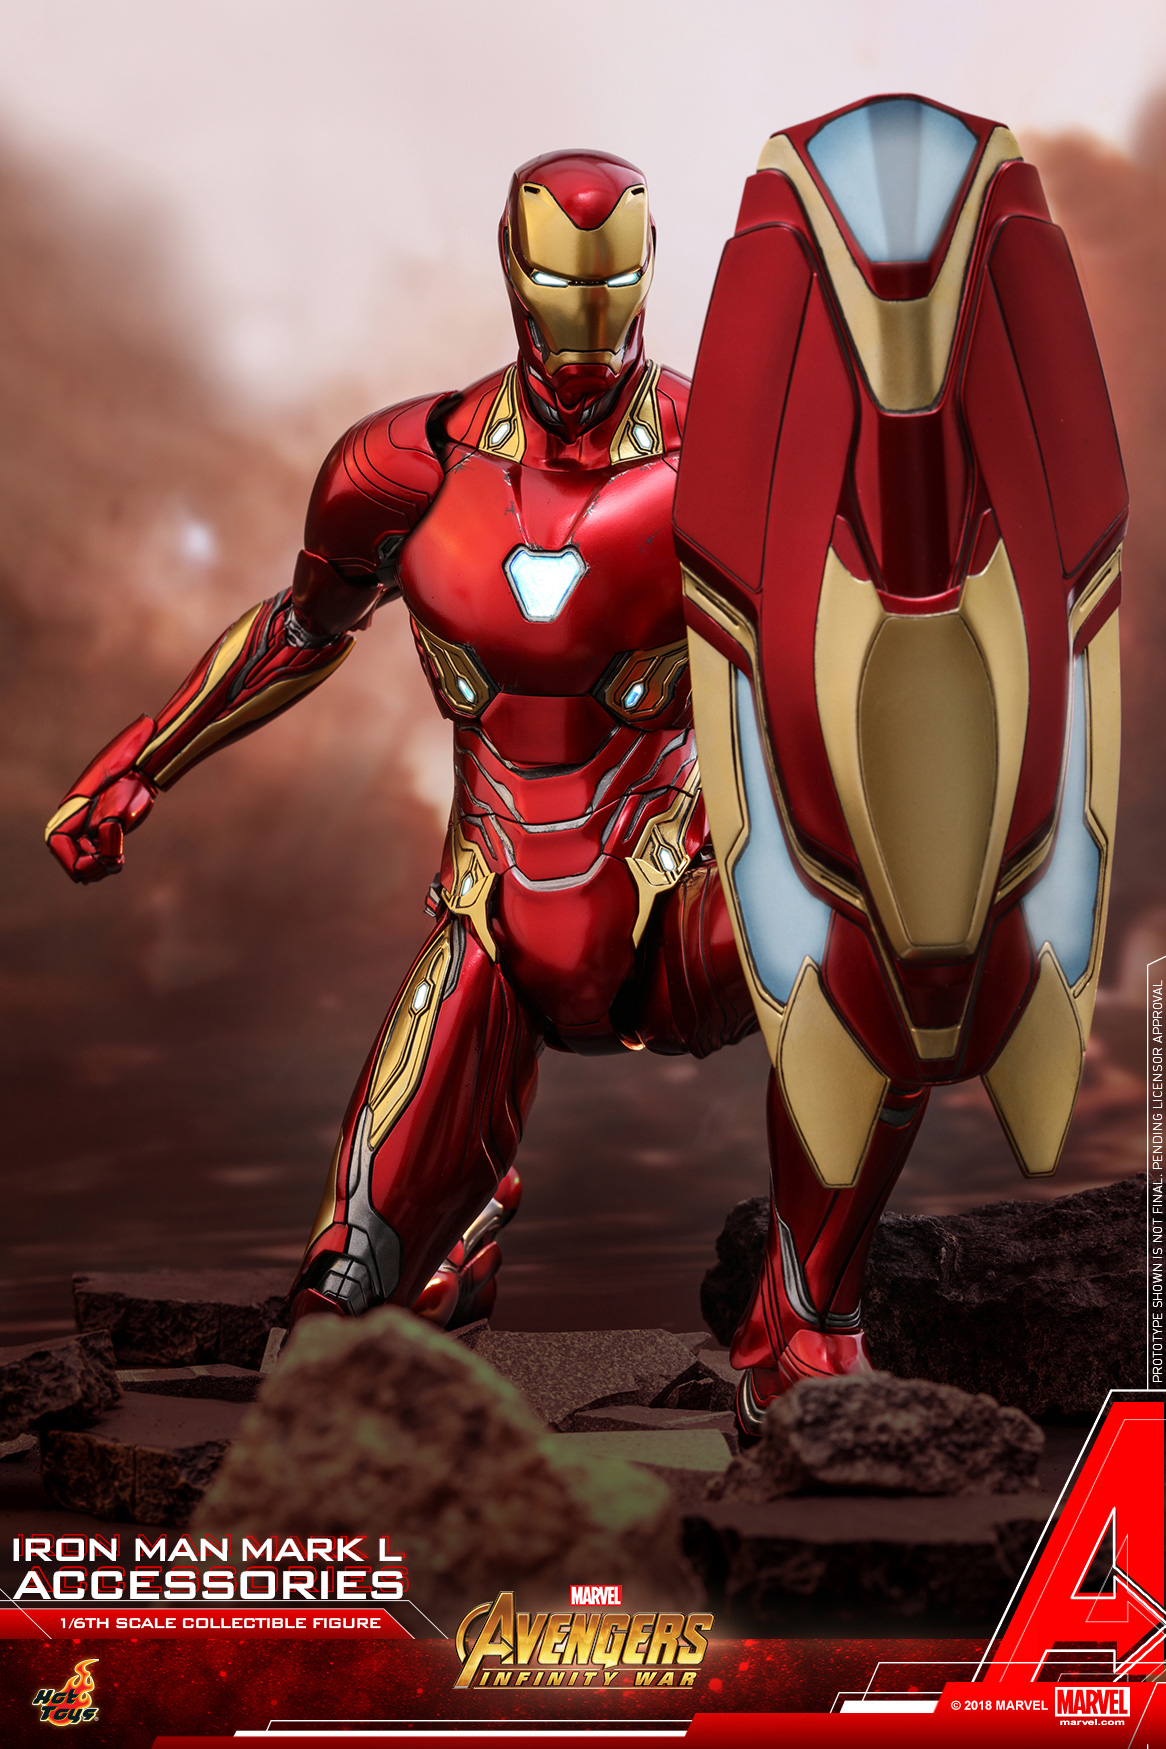 Hot-Toys---Avengers-3---Iron-Man-Mark-L-Accessories-Collectible-Set_PR9